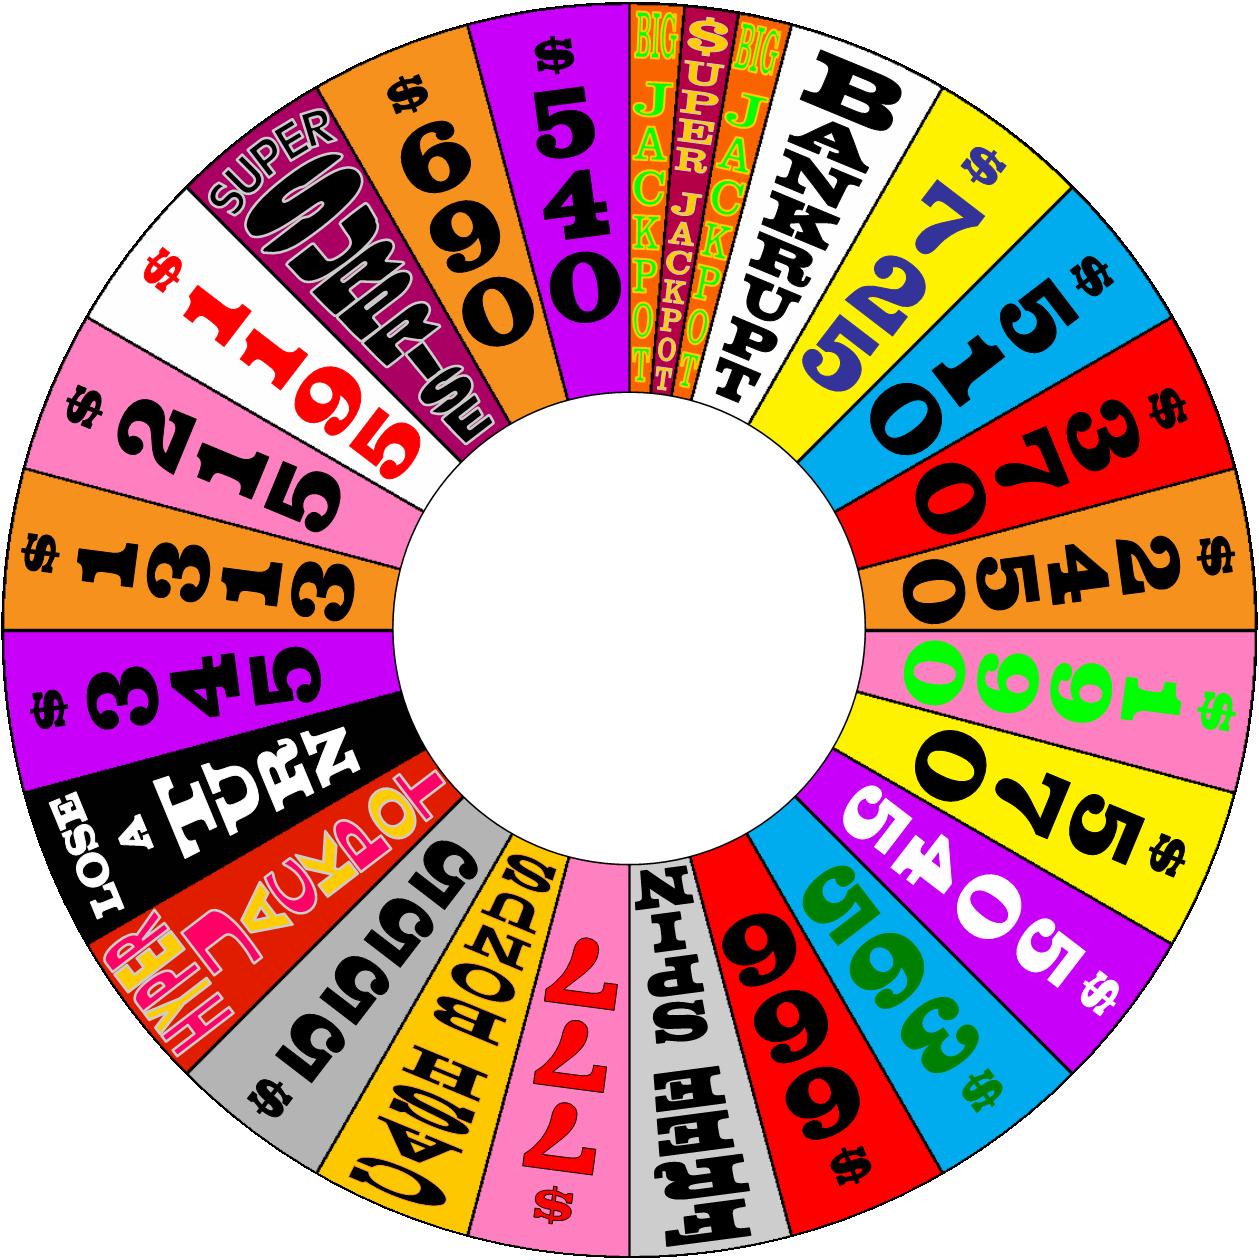 Wheel of Weirdness by germanname